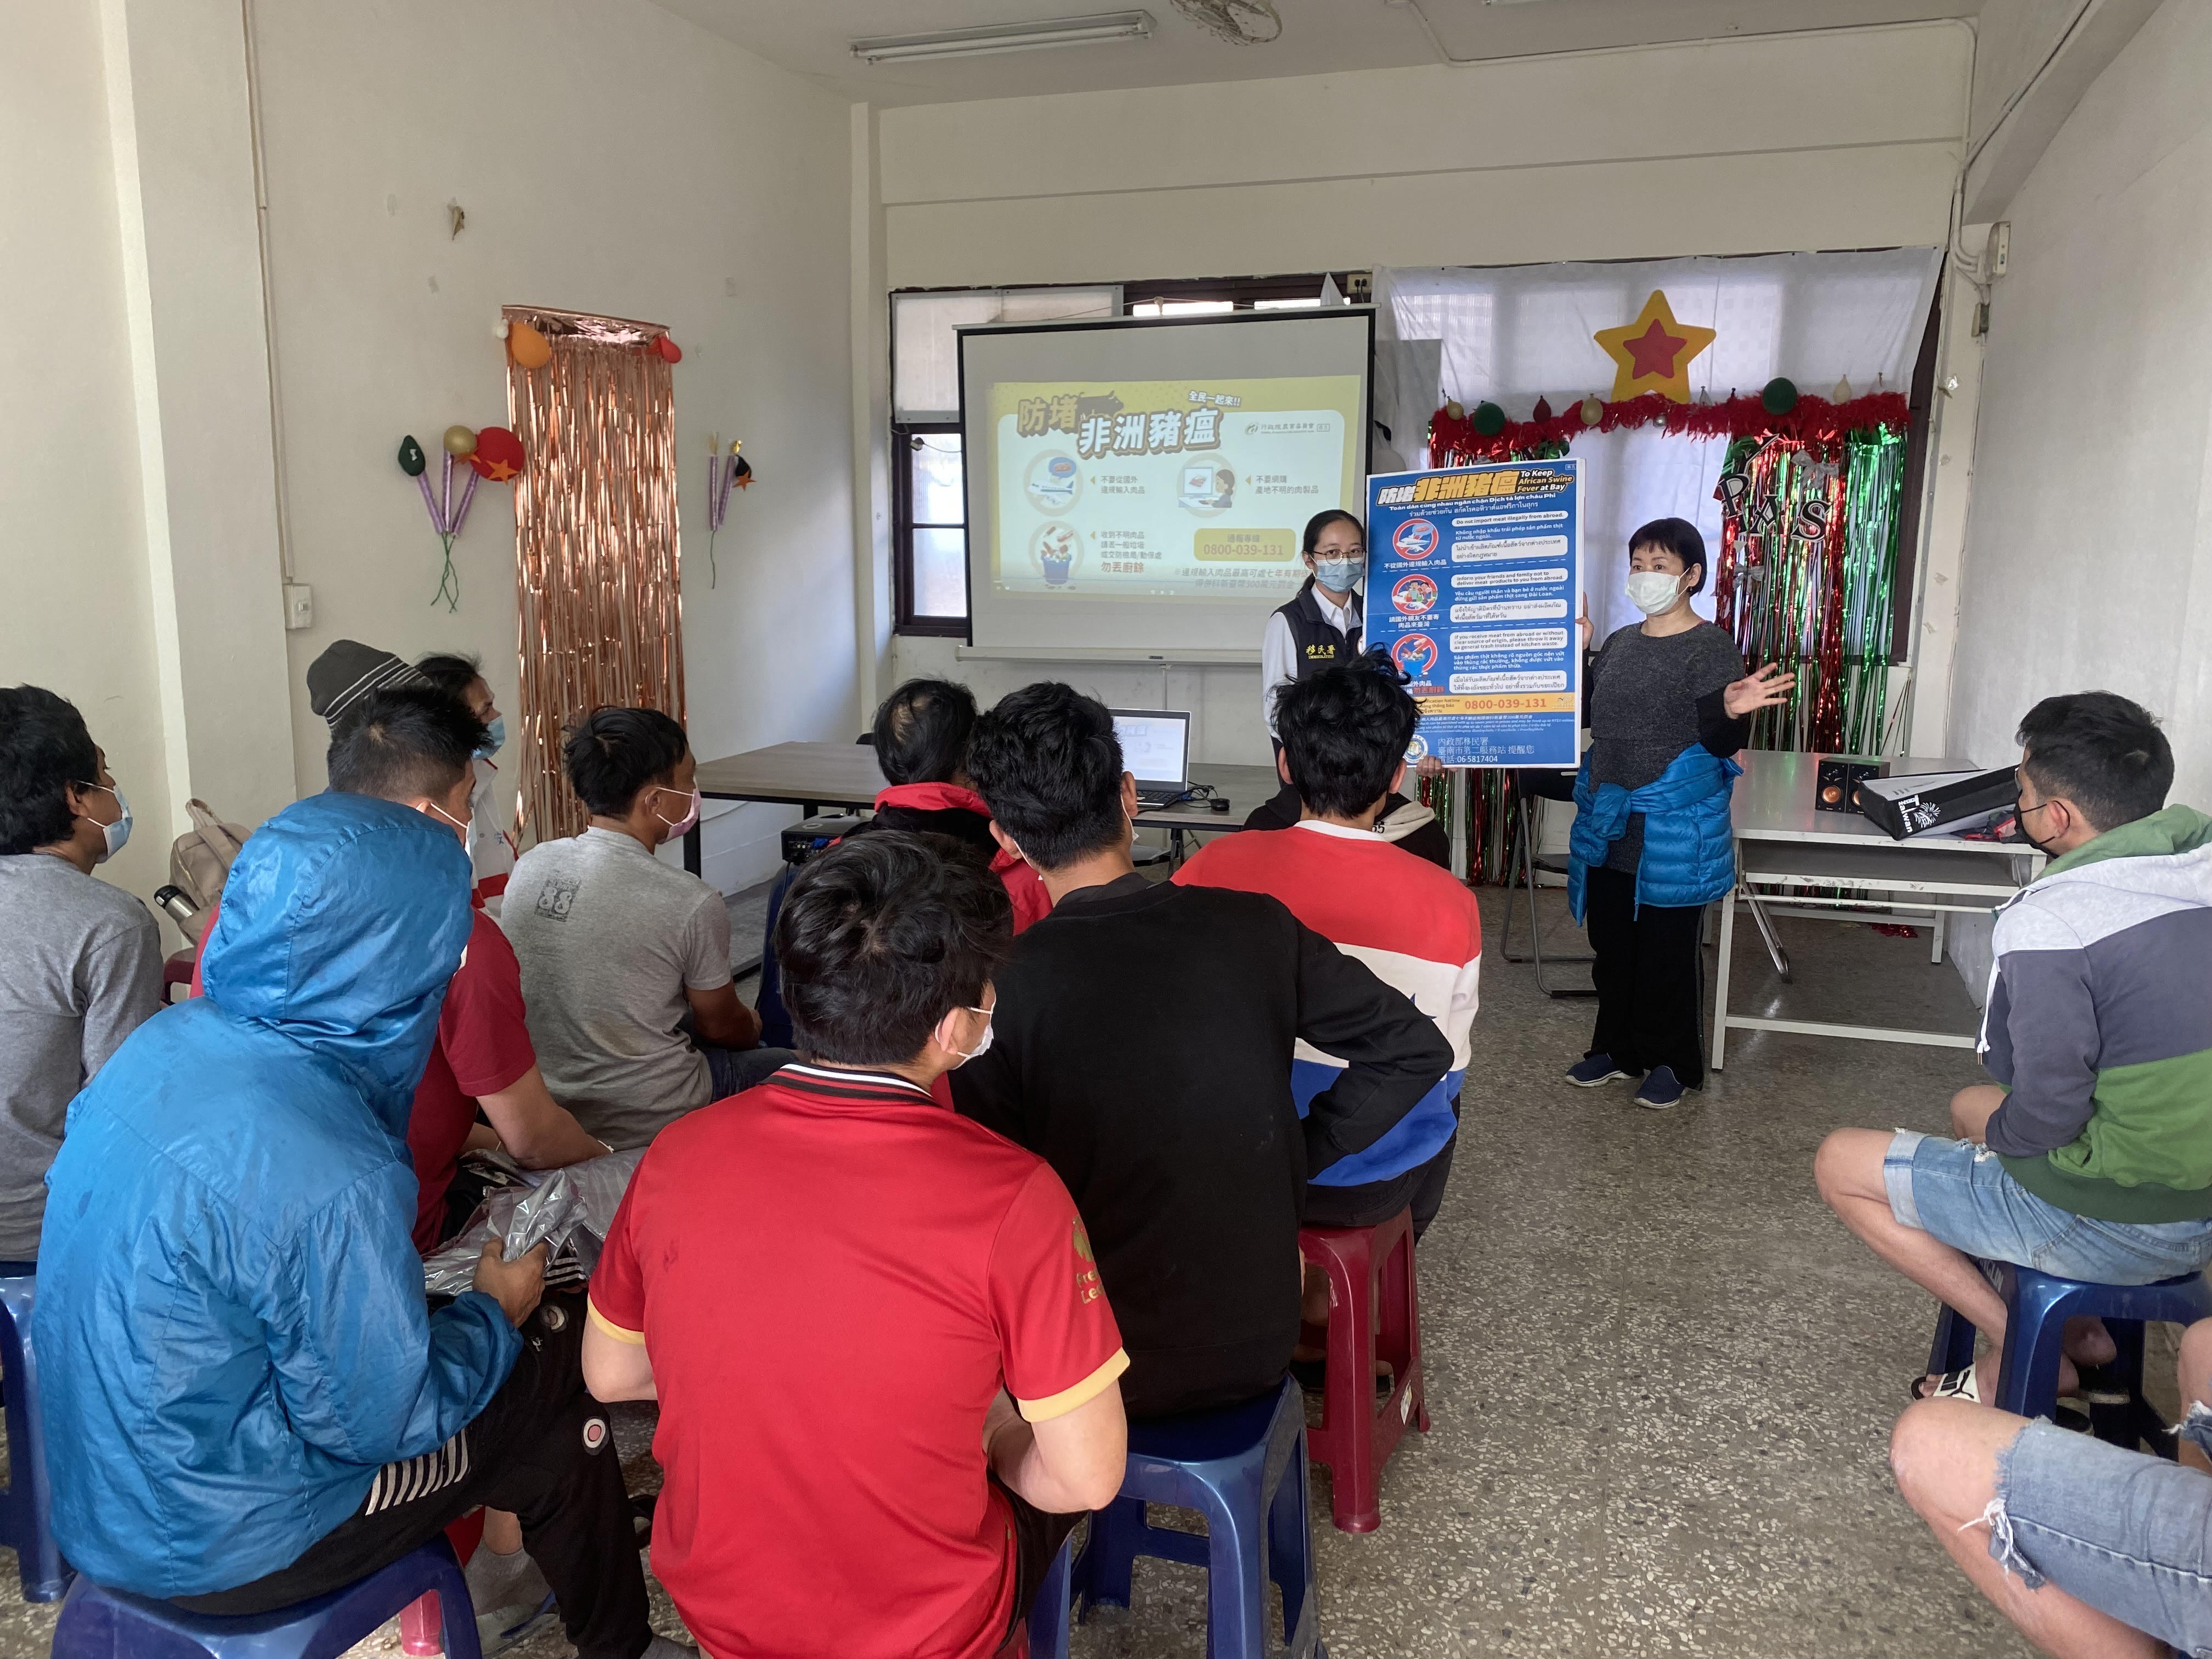 NIA Tainan City Second Service Center visited migrant workers’ dormitories to share “Prevention of African Swine Fever”. (Photo / Provided by Tainan City Second Service Center)